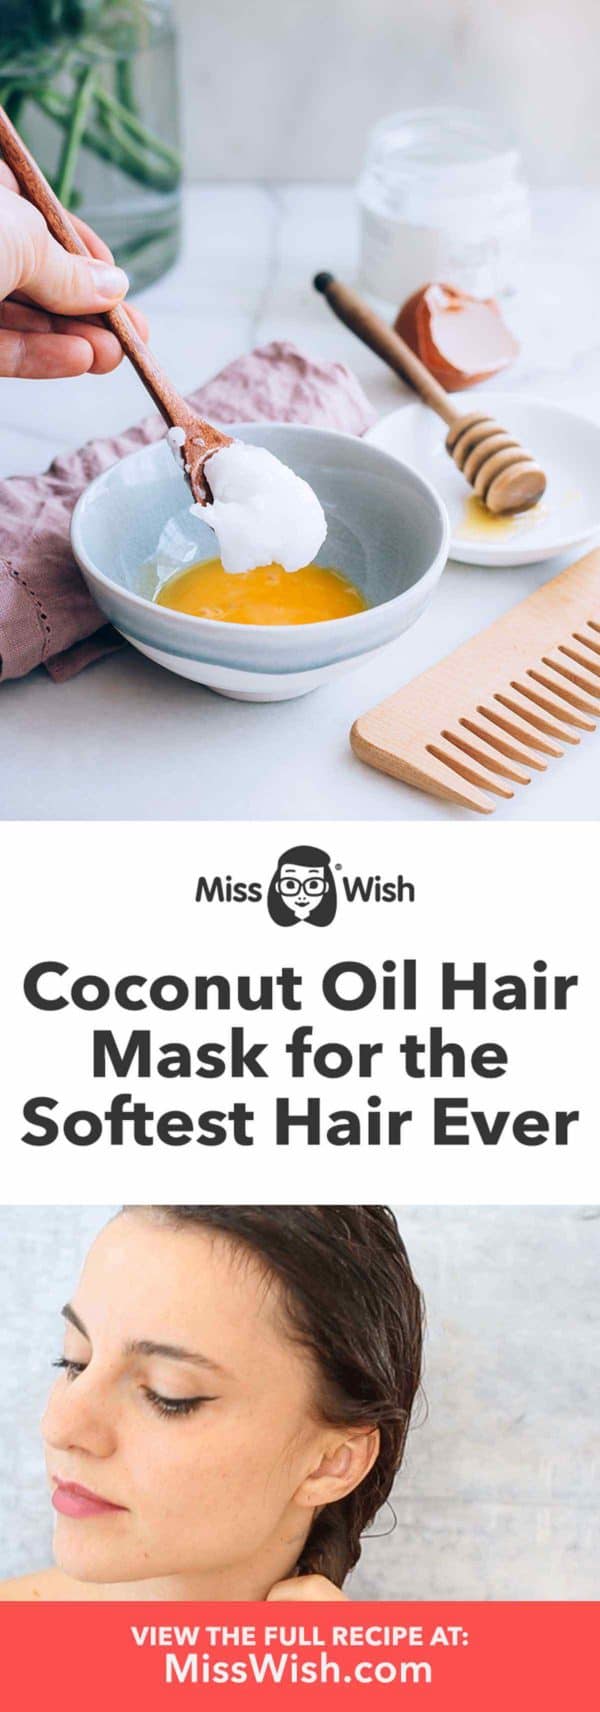 Outstanding Homemade Coconut Oil Hair Masks That Will Make Your Hair Soft And Shiny